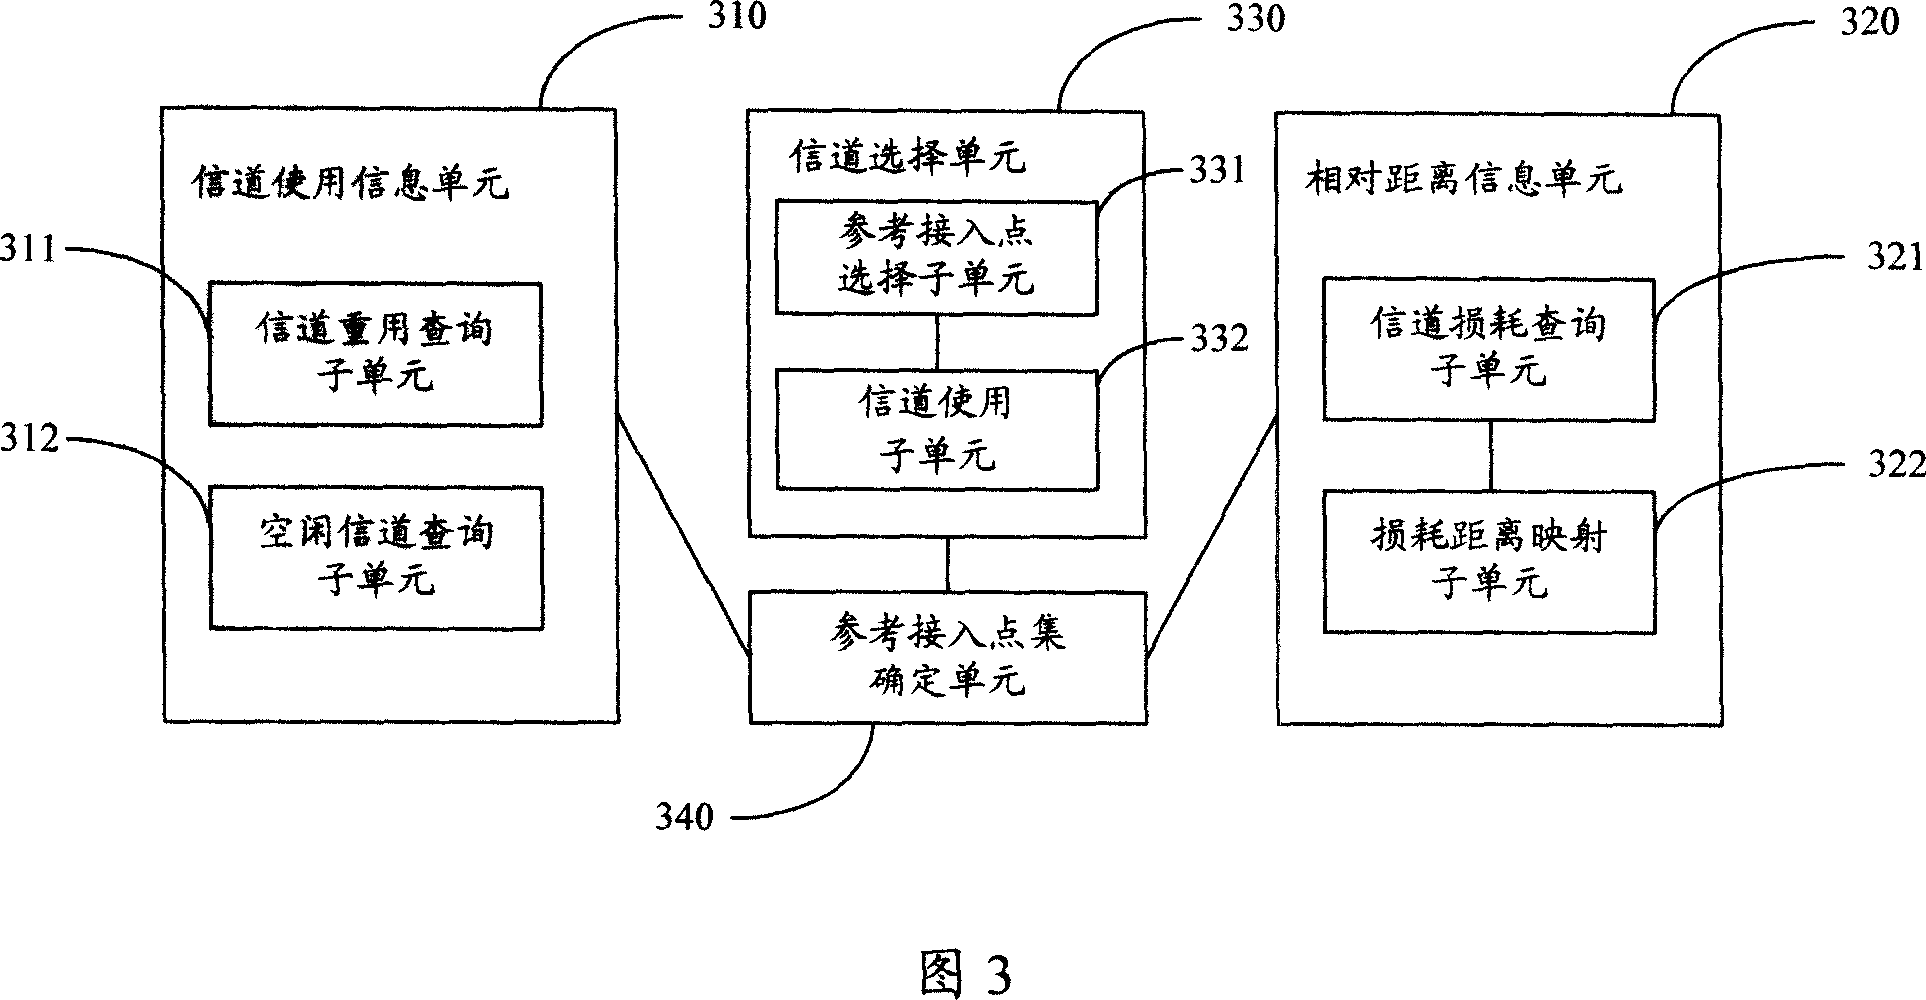 Channel selecting method and equipment of accessing point